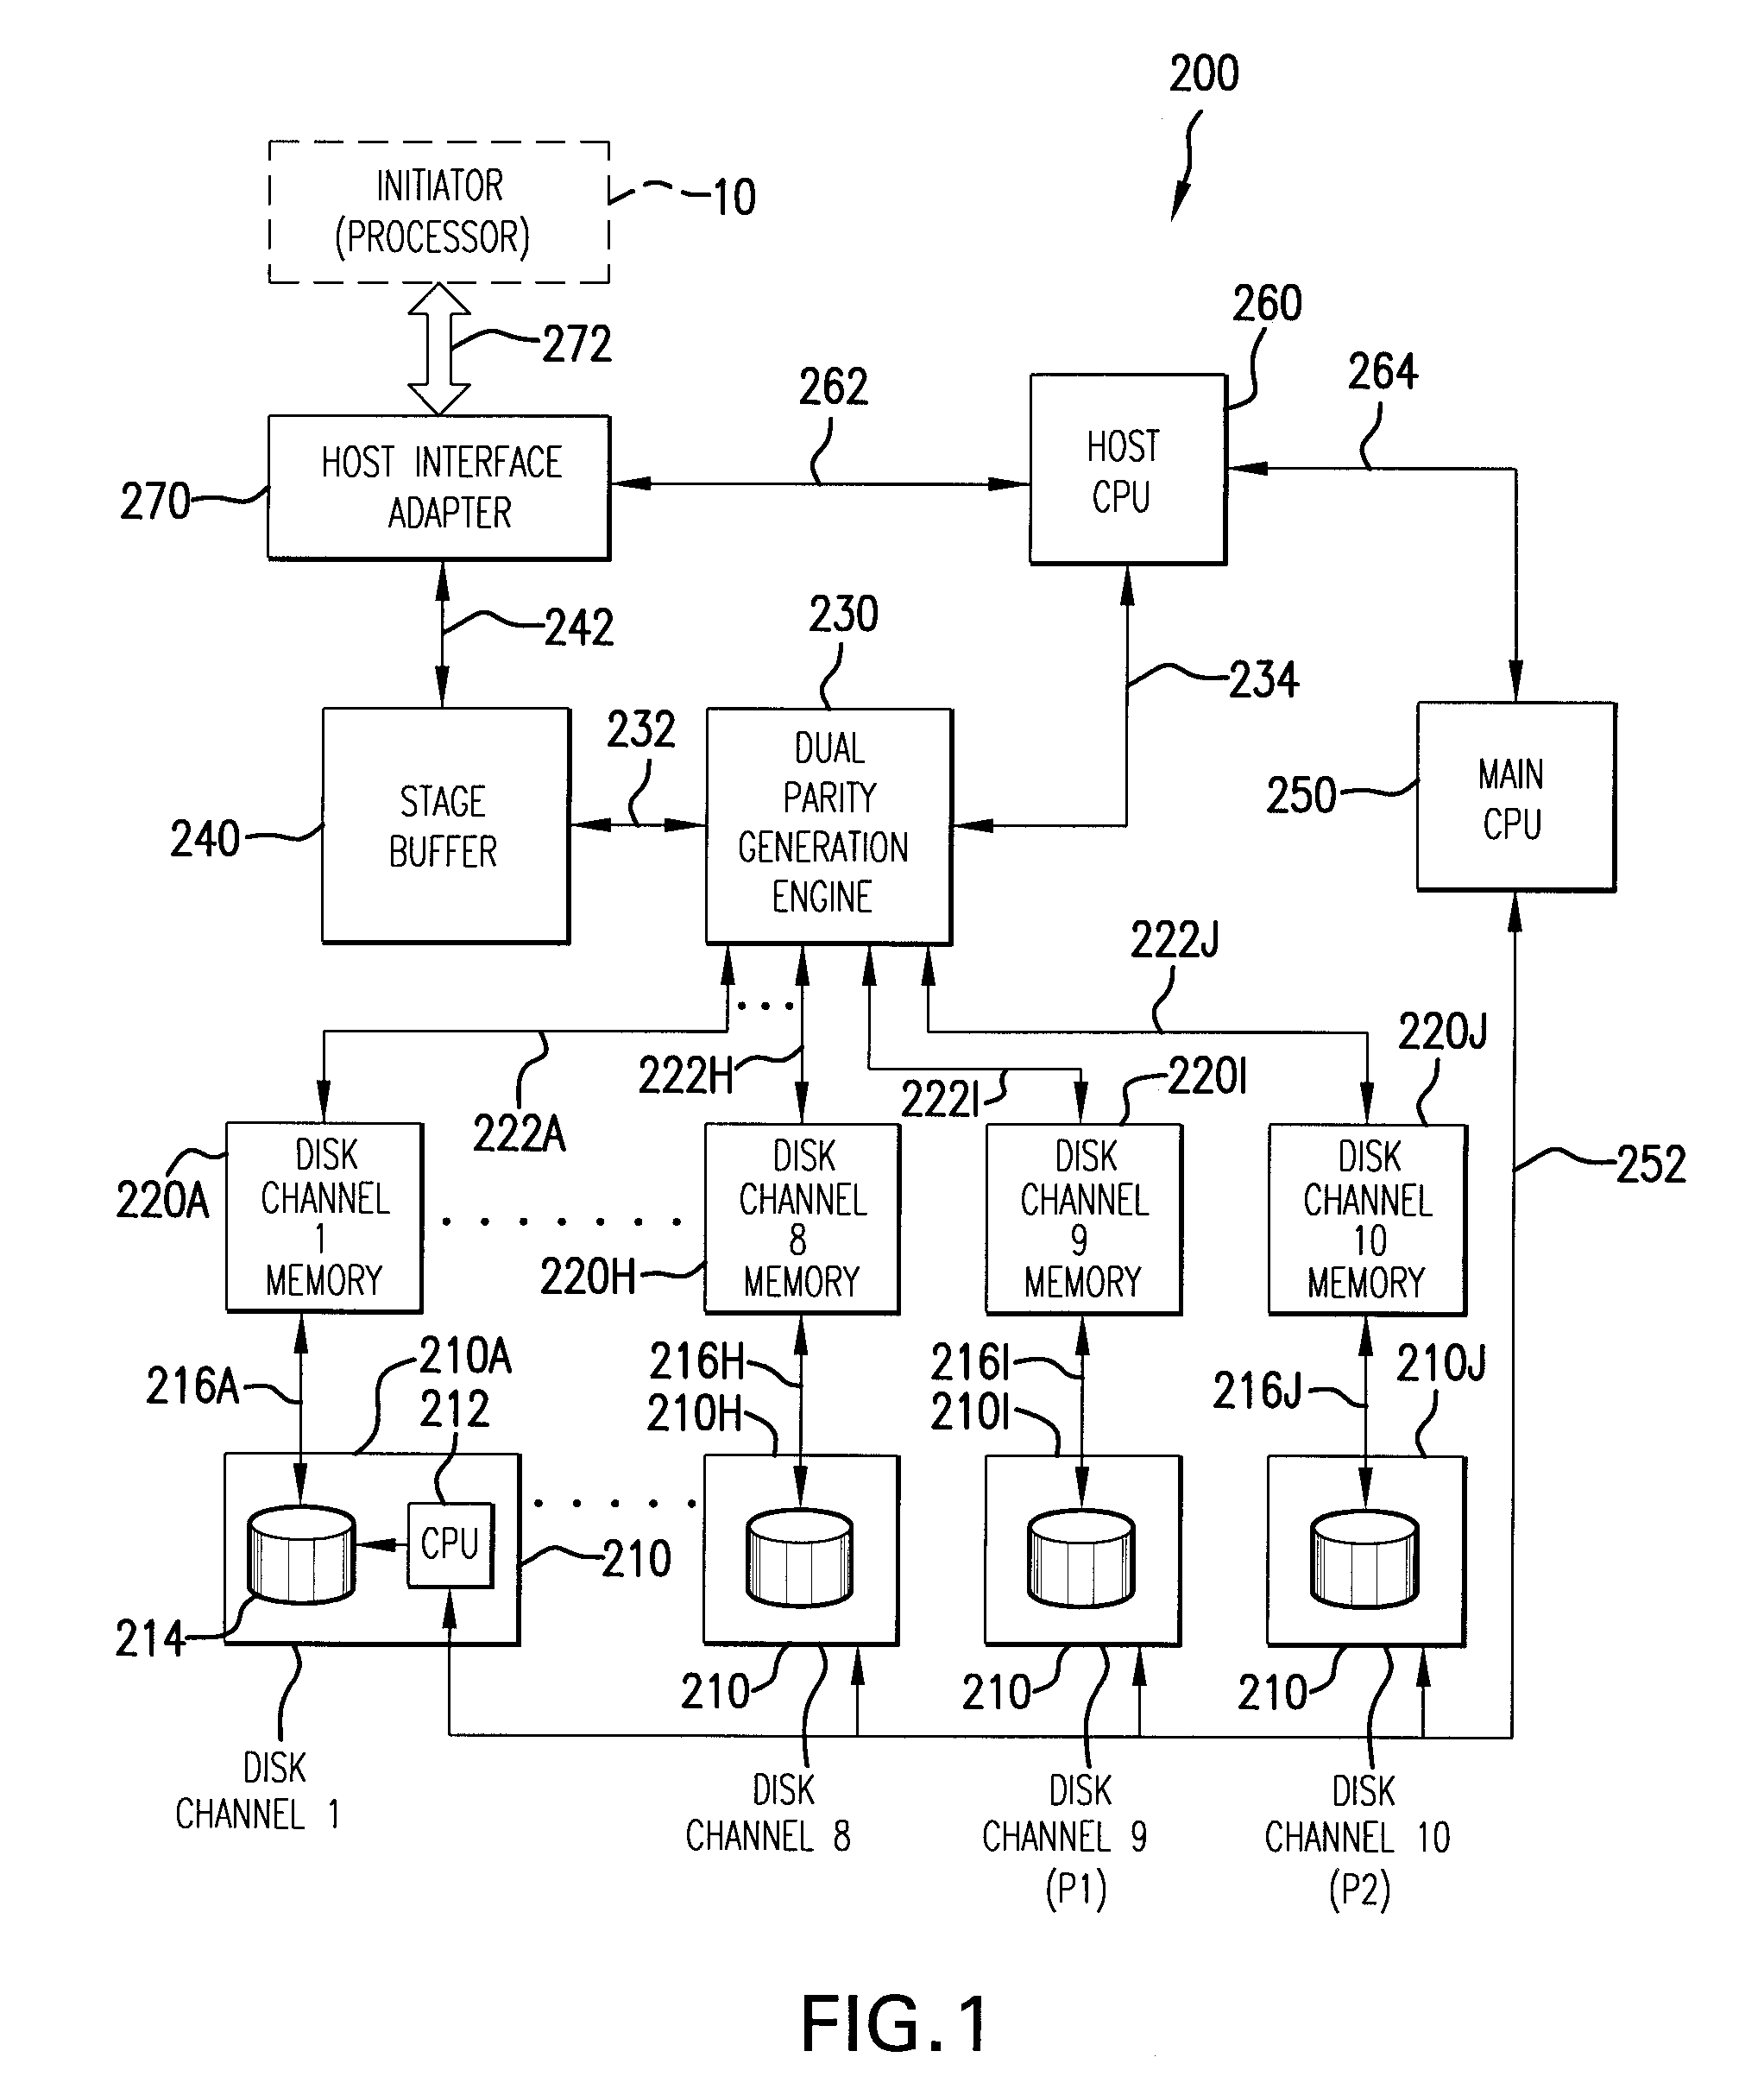 Method for auto-correction of errors in a raid memory system